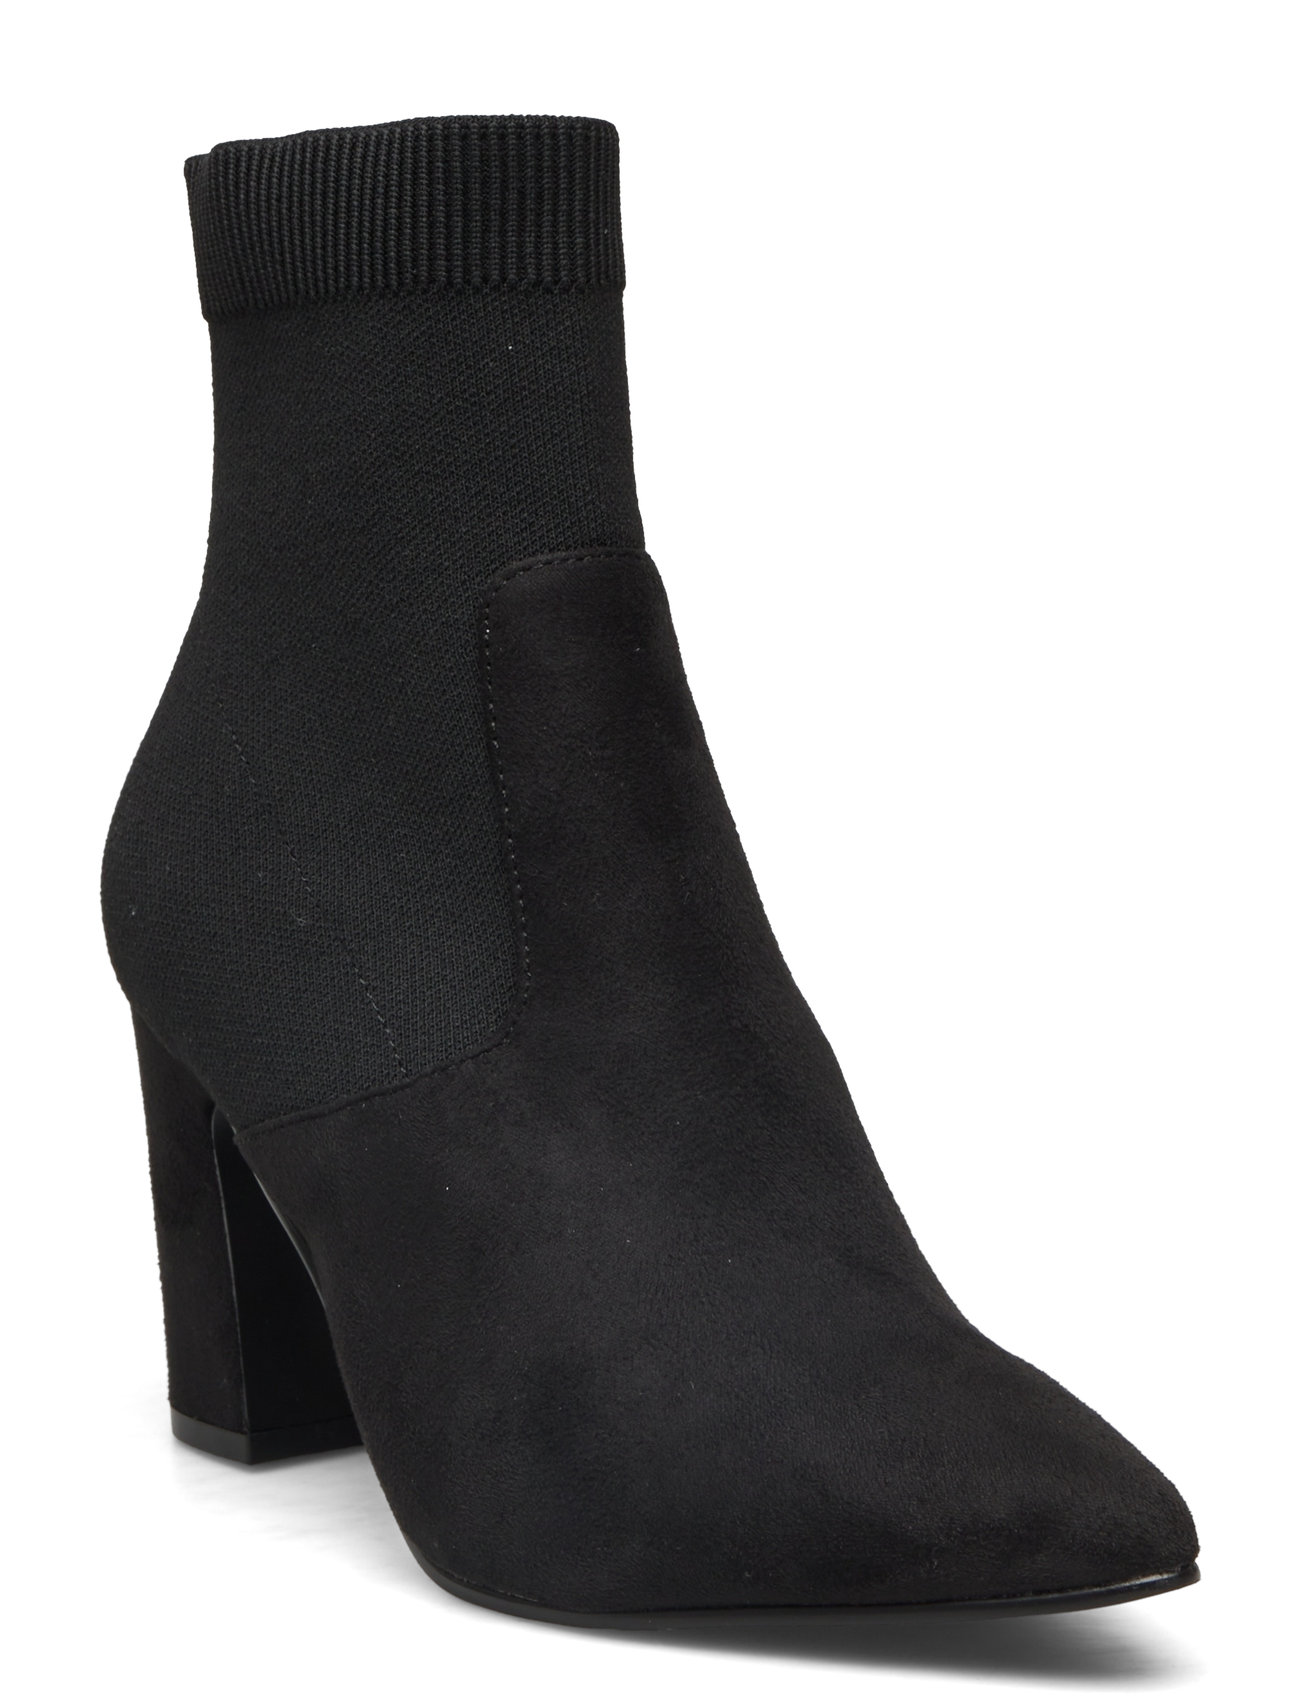 Research Bootie Shoes Boots Ankle Boots Ankle Boots With Heel Black Steve Madden